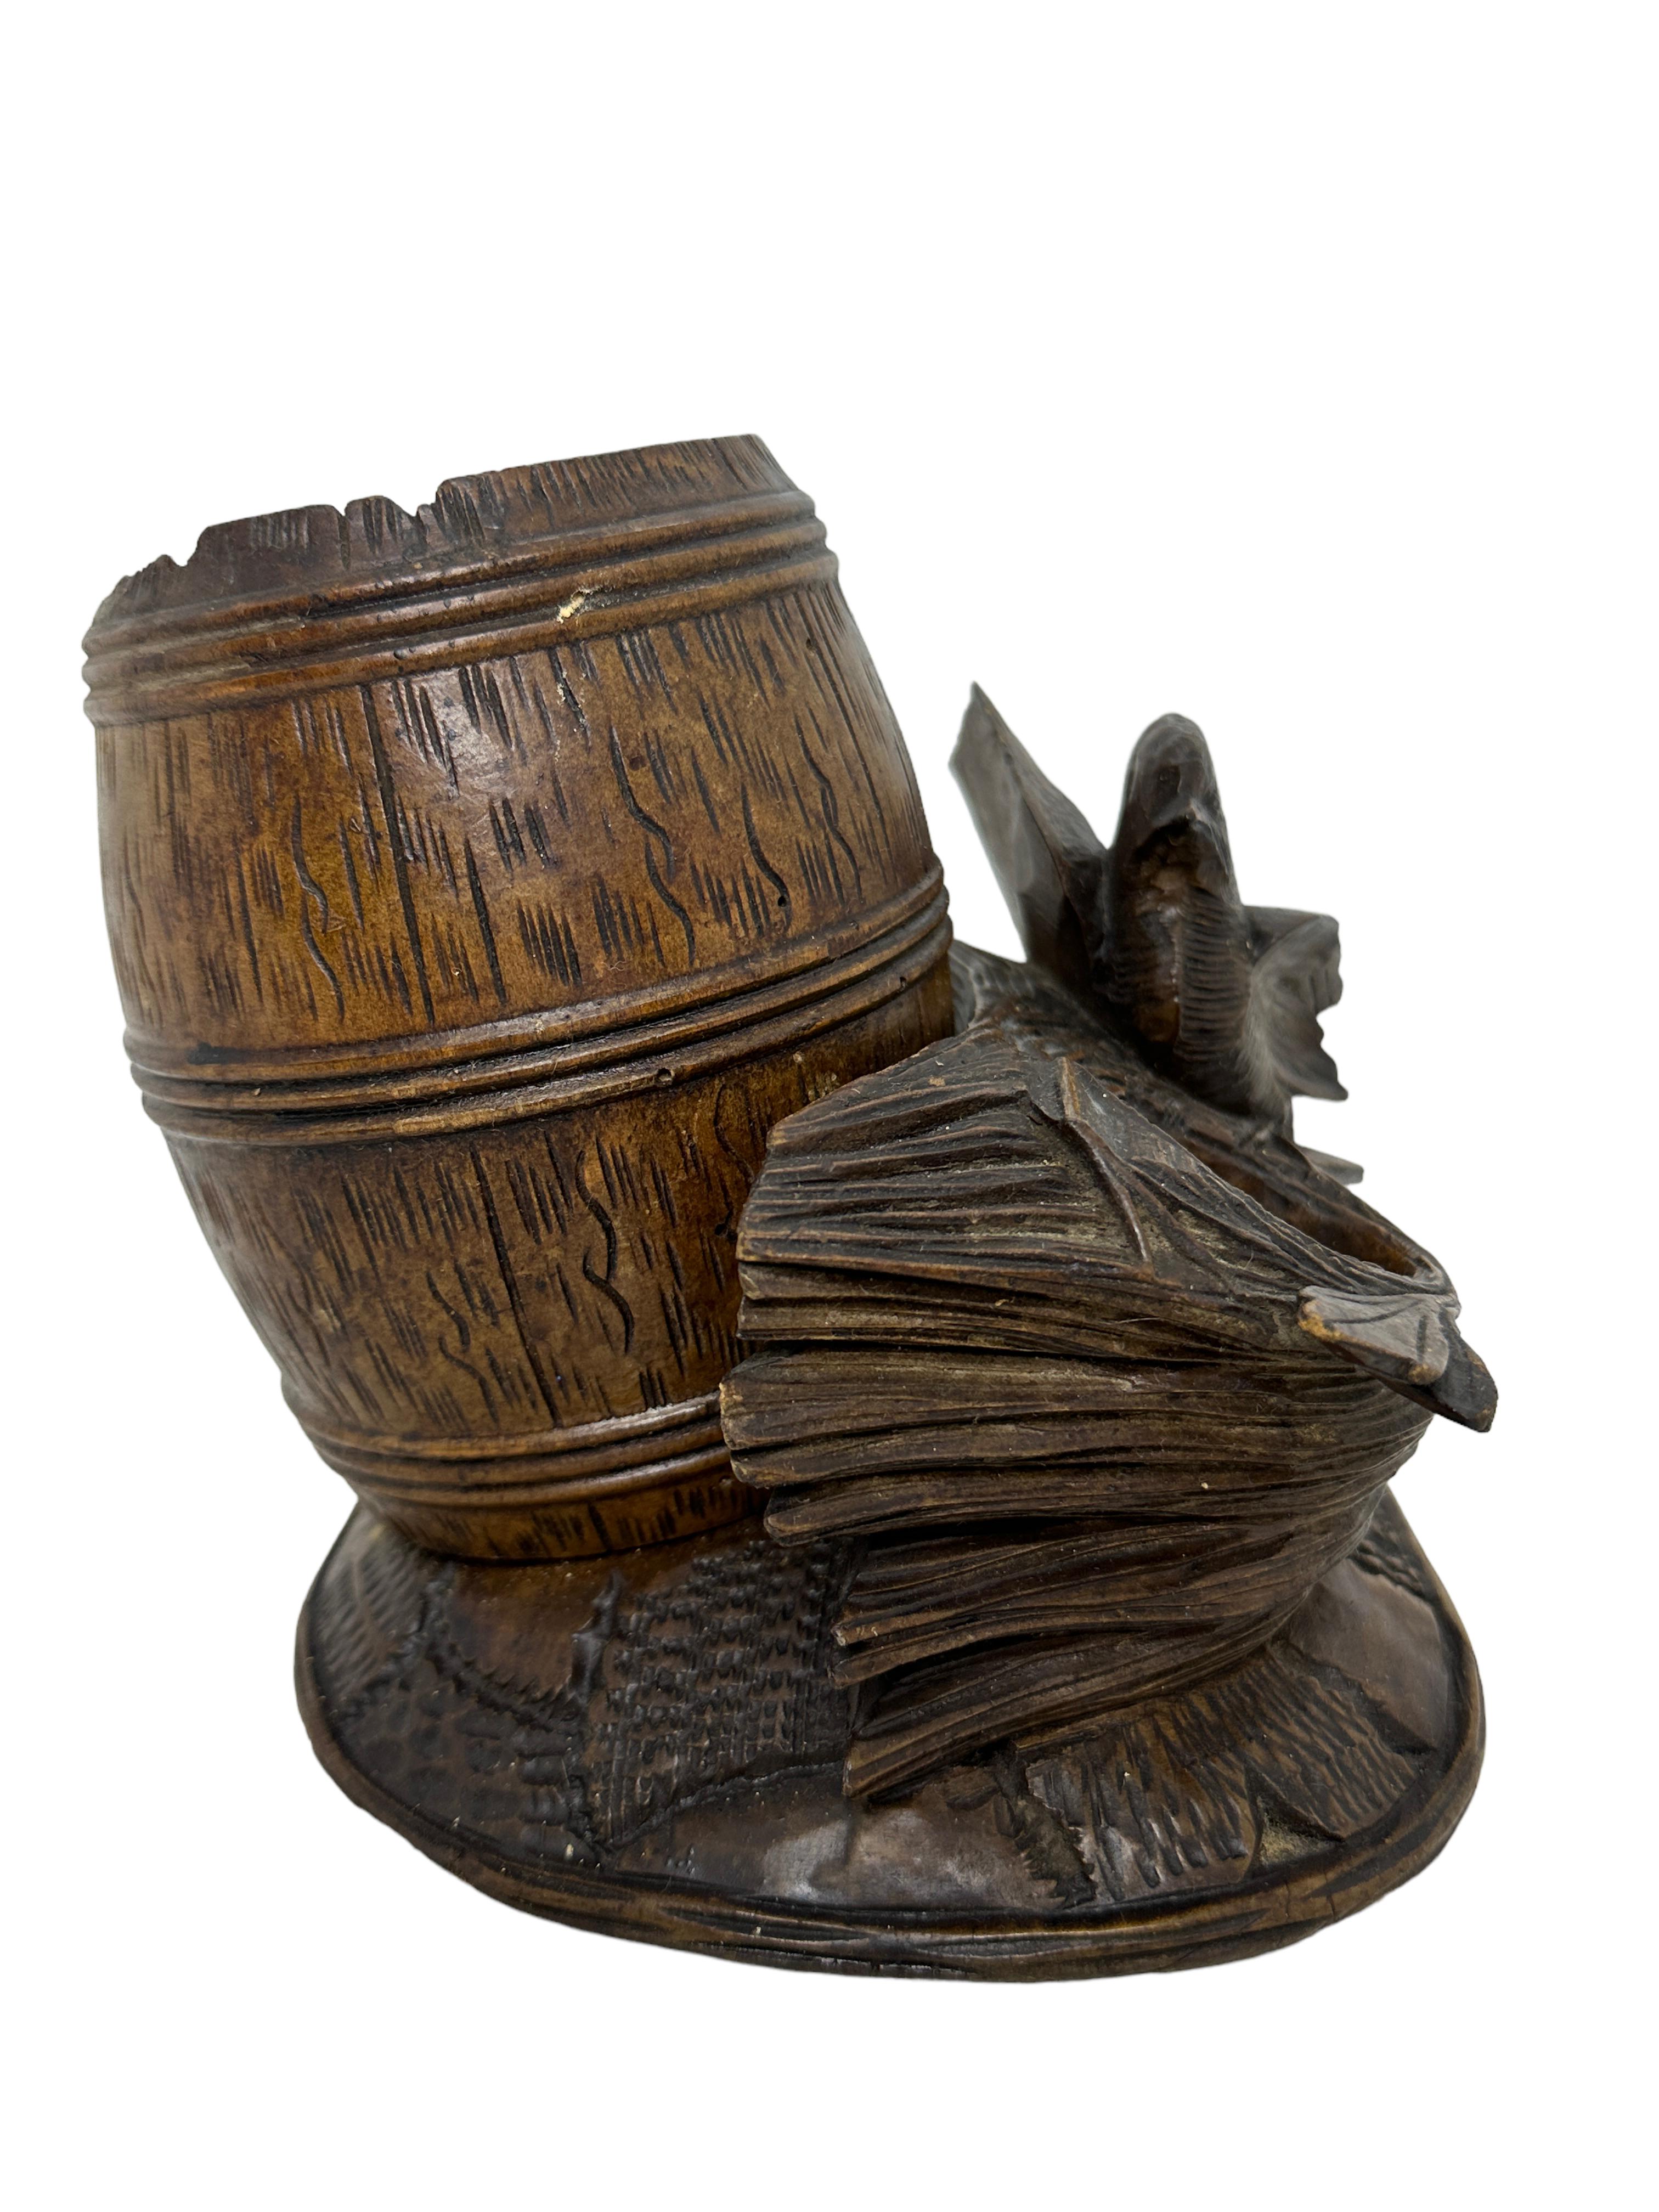 Classic 1890s black forest Brienz wood carved desktop accessory in form of a Barrel with a Bird. Nice addition to your room or just for use it on your desk. Made of hand carved wood. Found at an estate sale in Vienna, Austria. The Barrel can hold